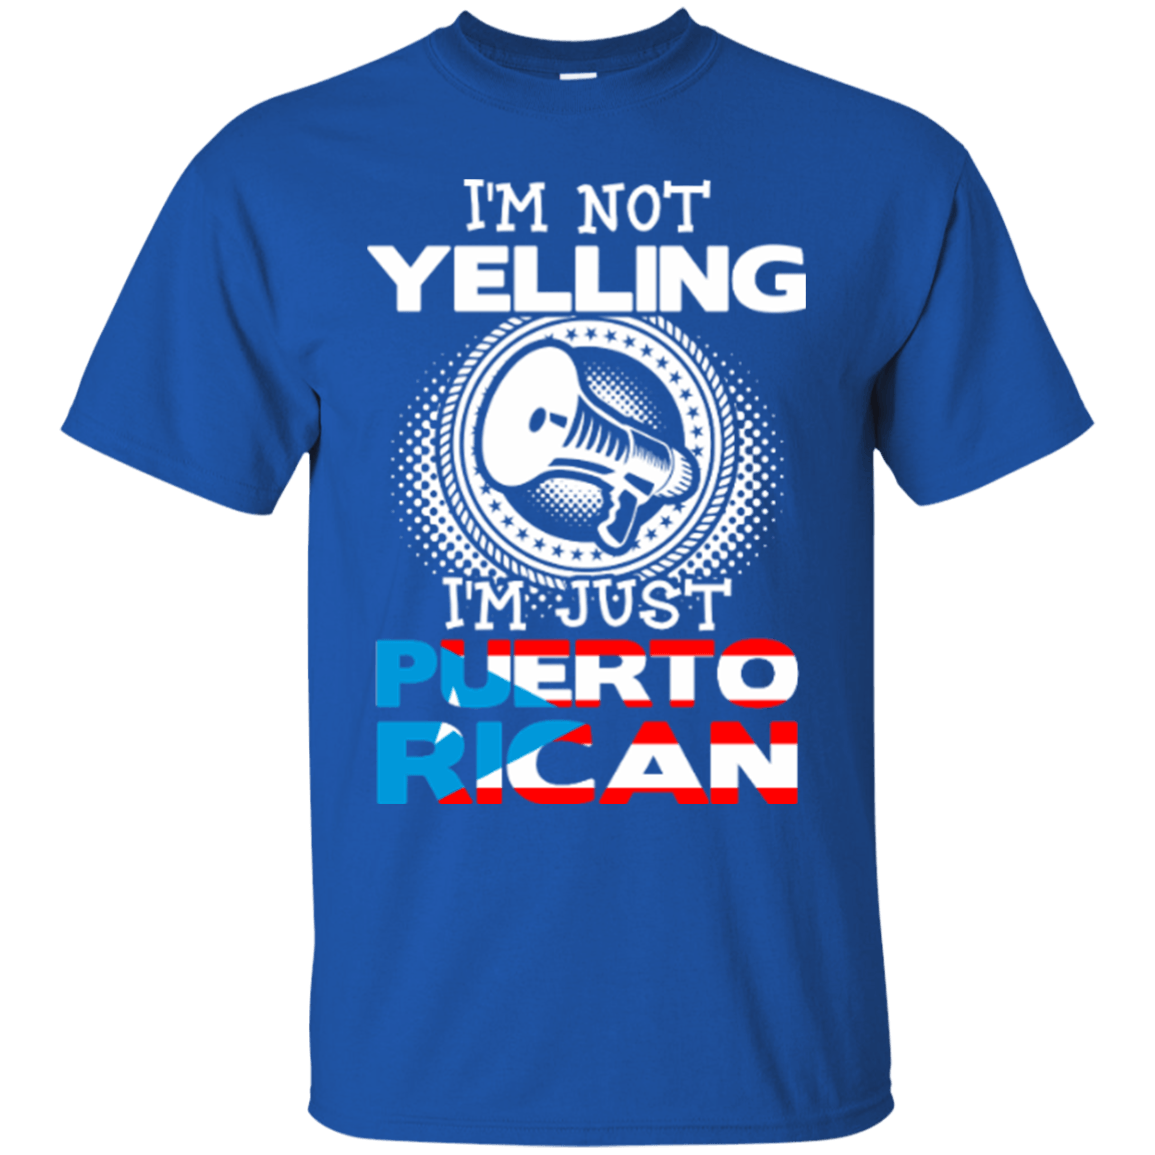 Youth Tee - Not Yelling, Just Puerto Rican - Youth Tee